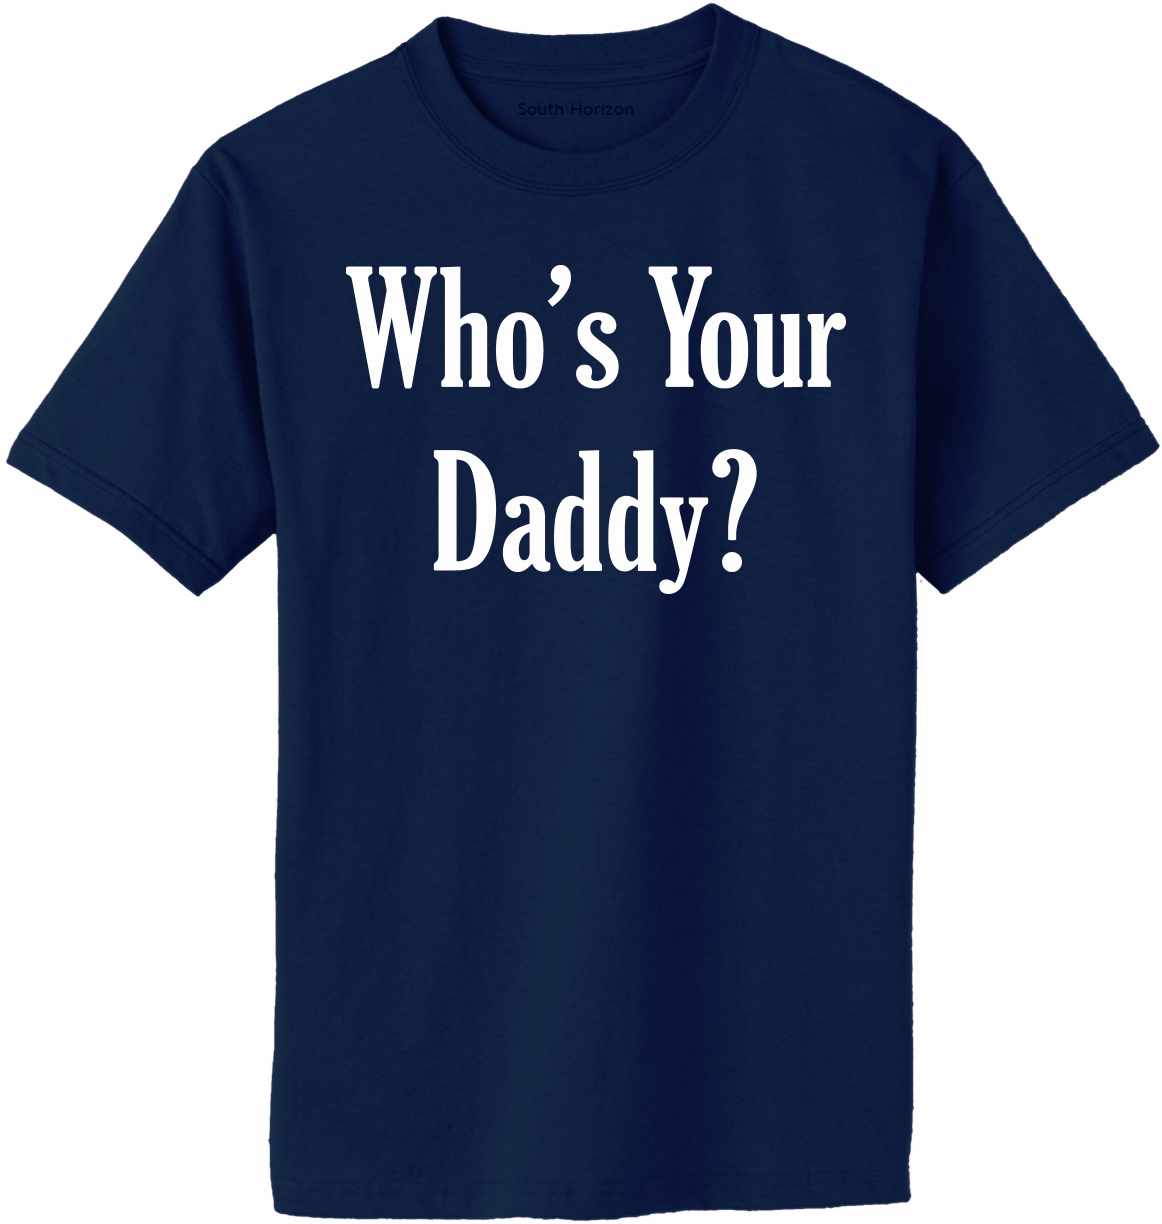 Who's Your Daddy, Dad Gift, Fathers Day Shirt – South Horizon T